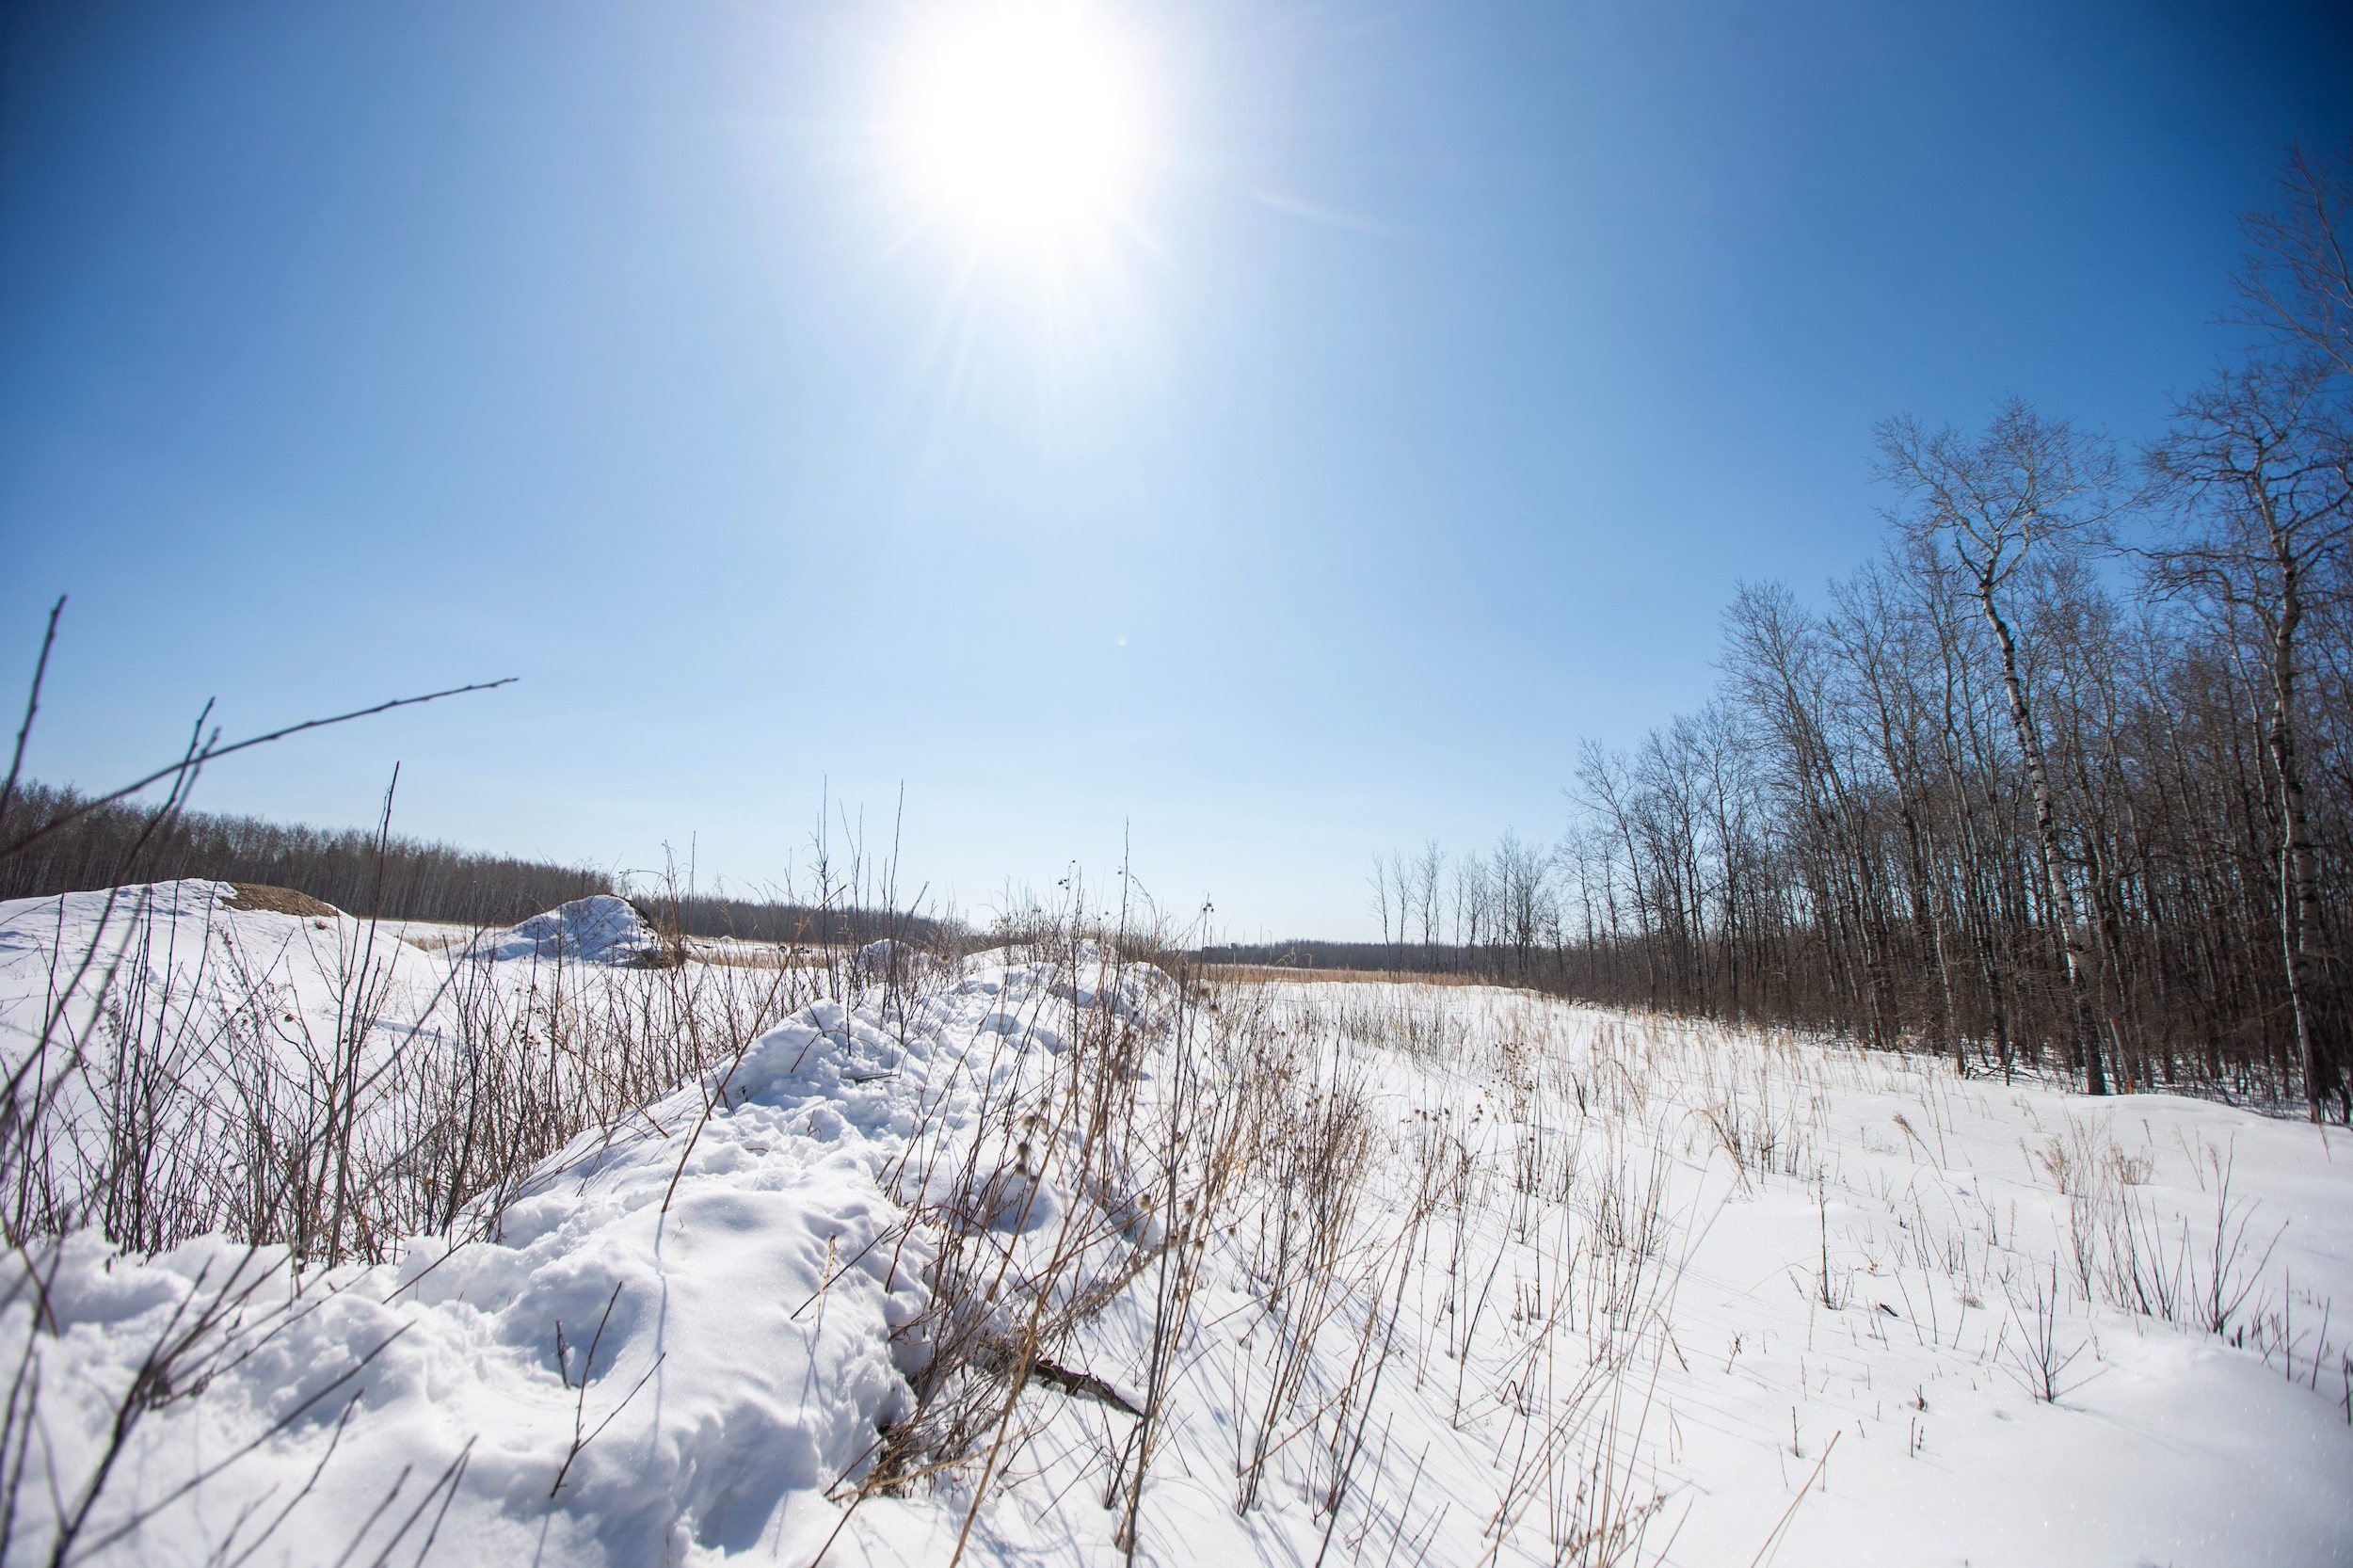 A snow filled clearing where Sio Silica plans to build a silica sand processing facility near Vivian, Manitoba